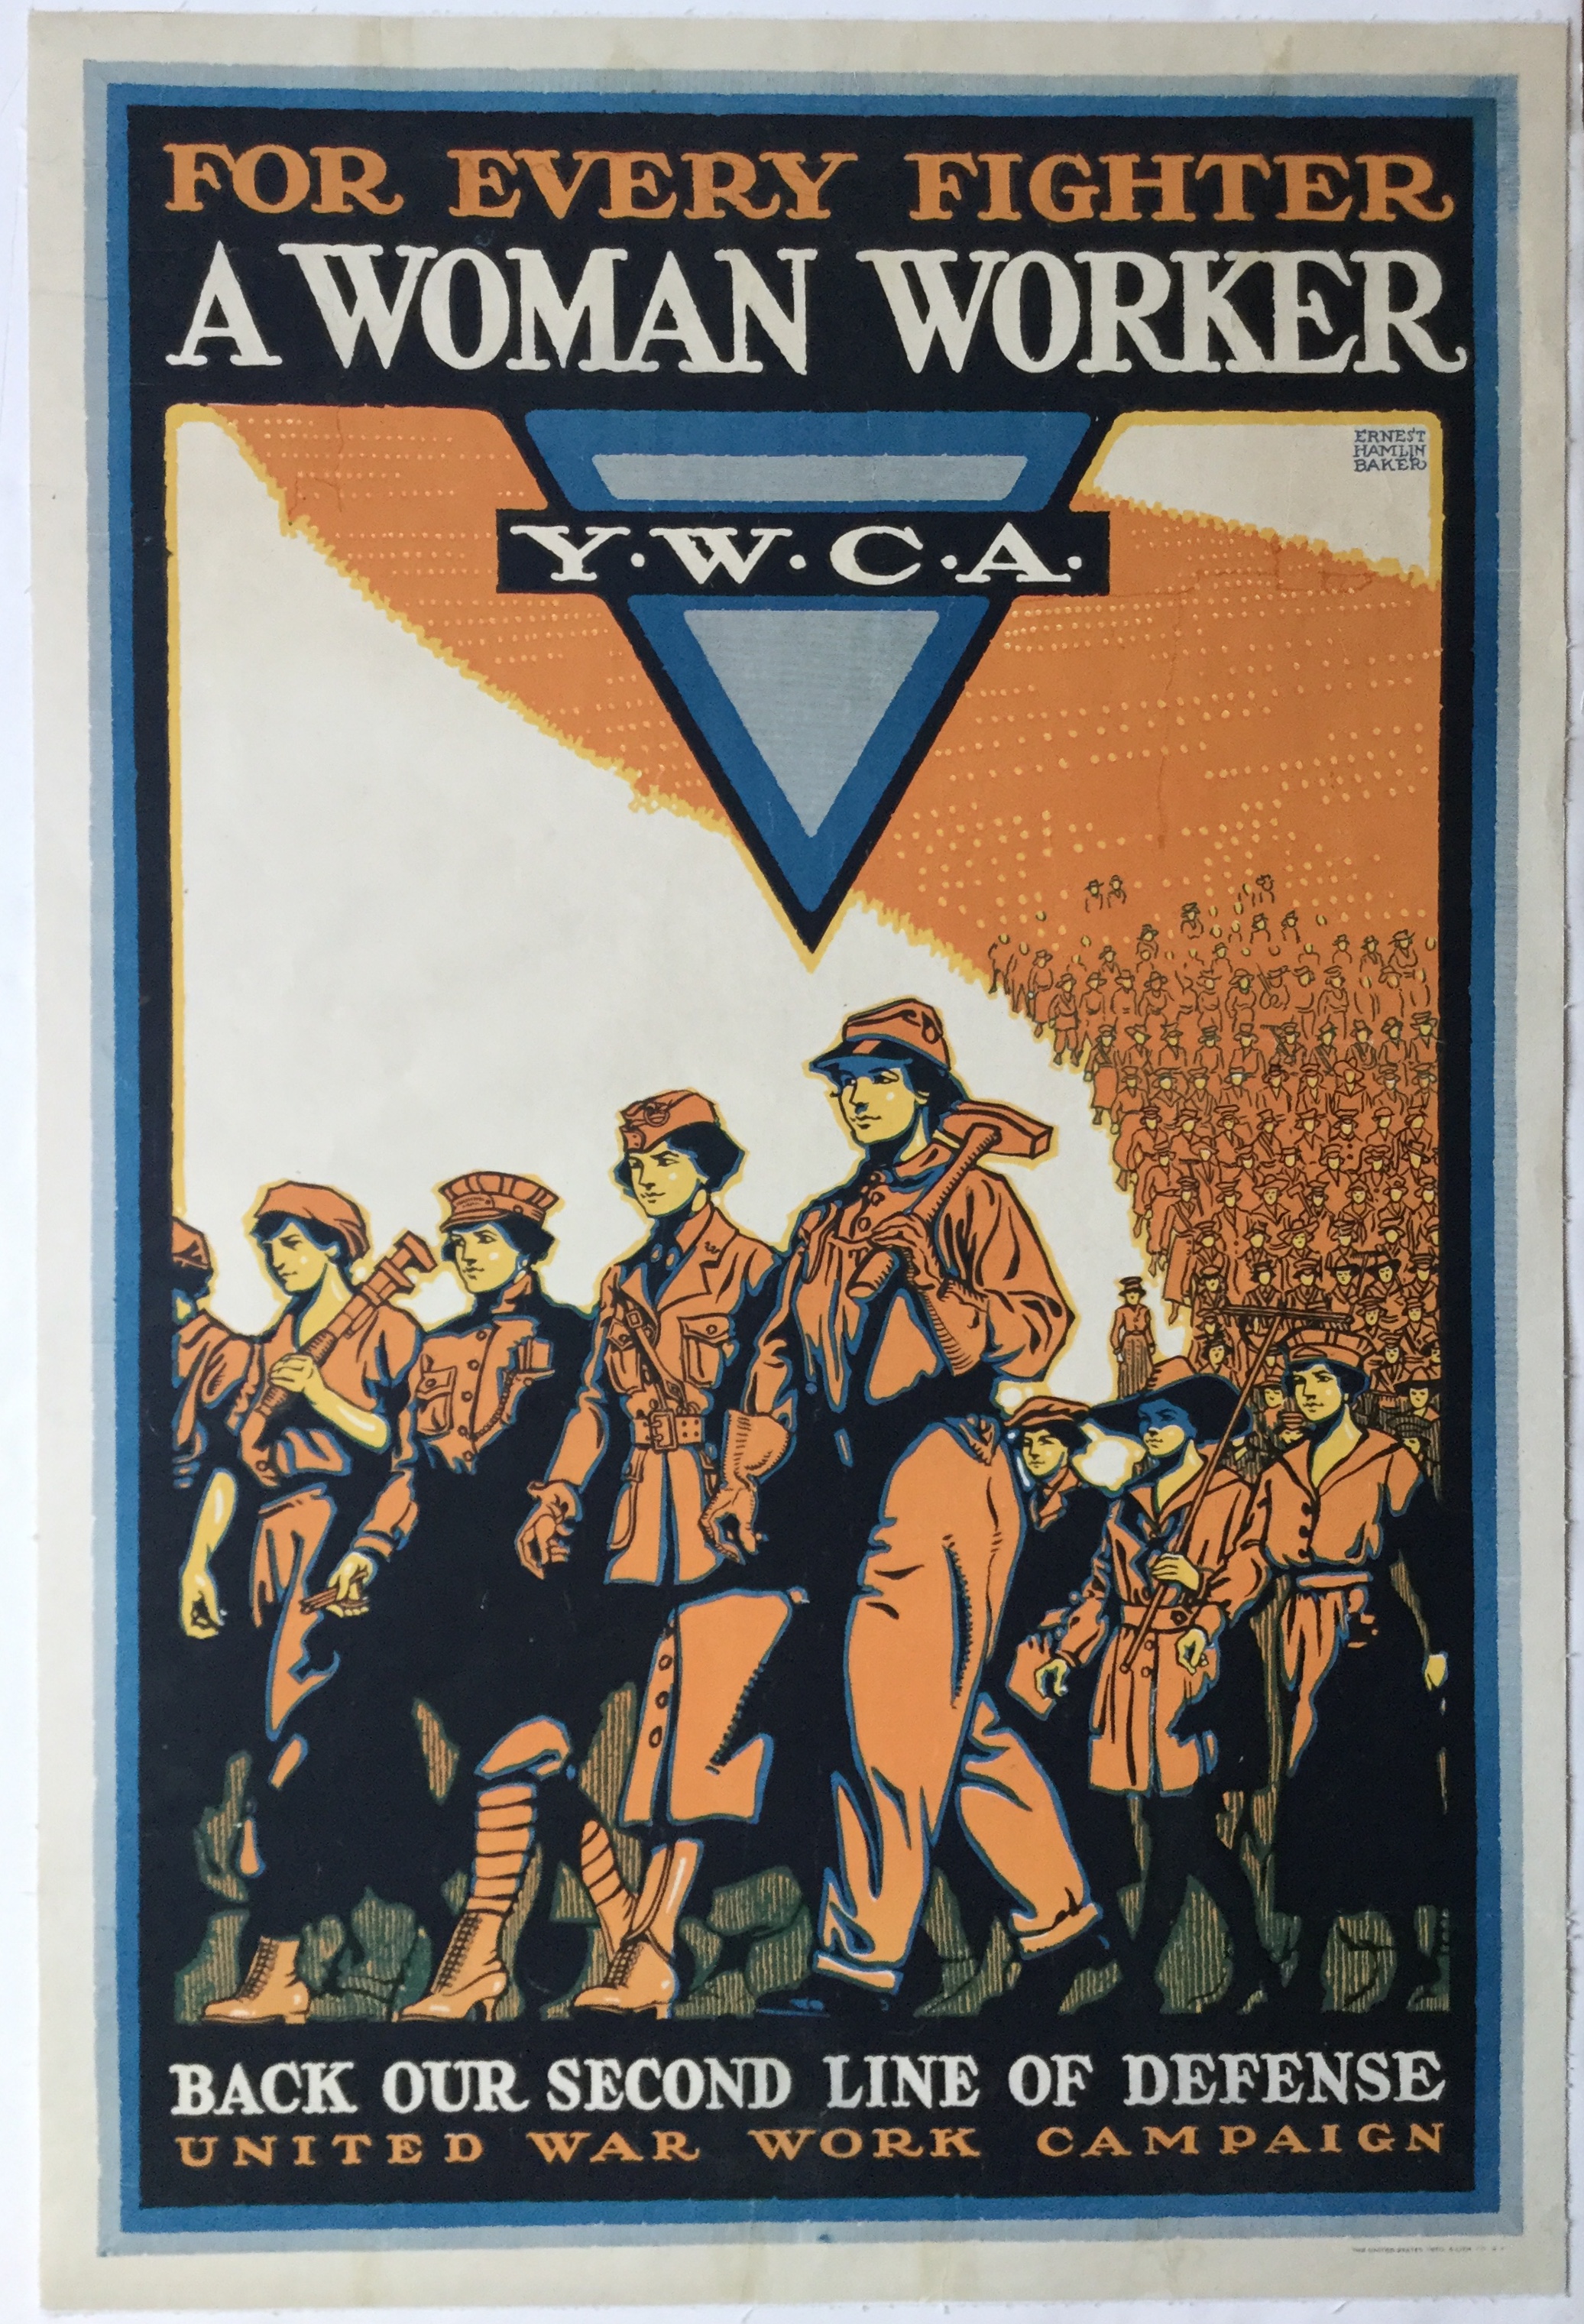 WW1245	FOR EVERY FIGHTER A WOMAN WORKER - Y W C A